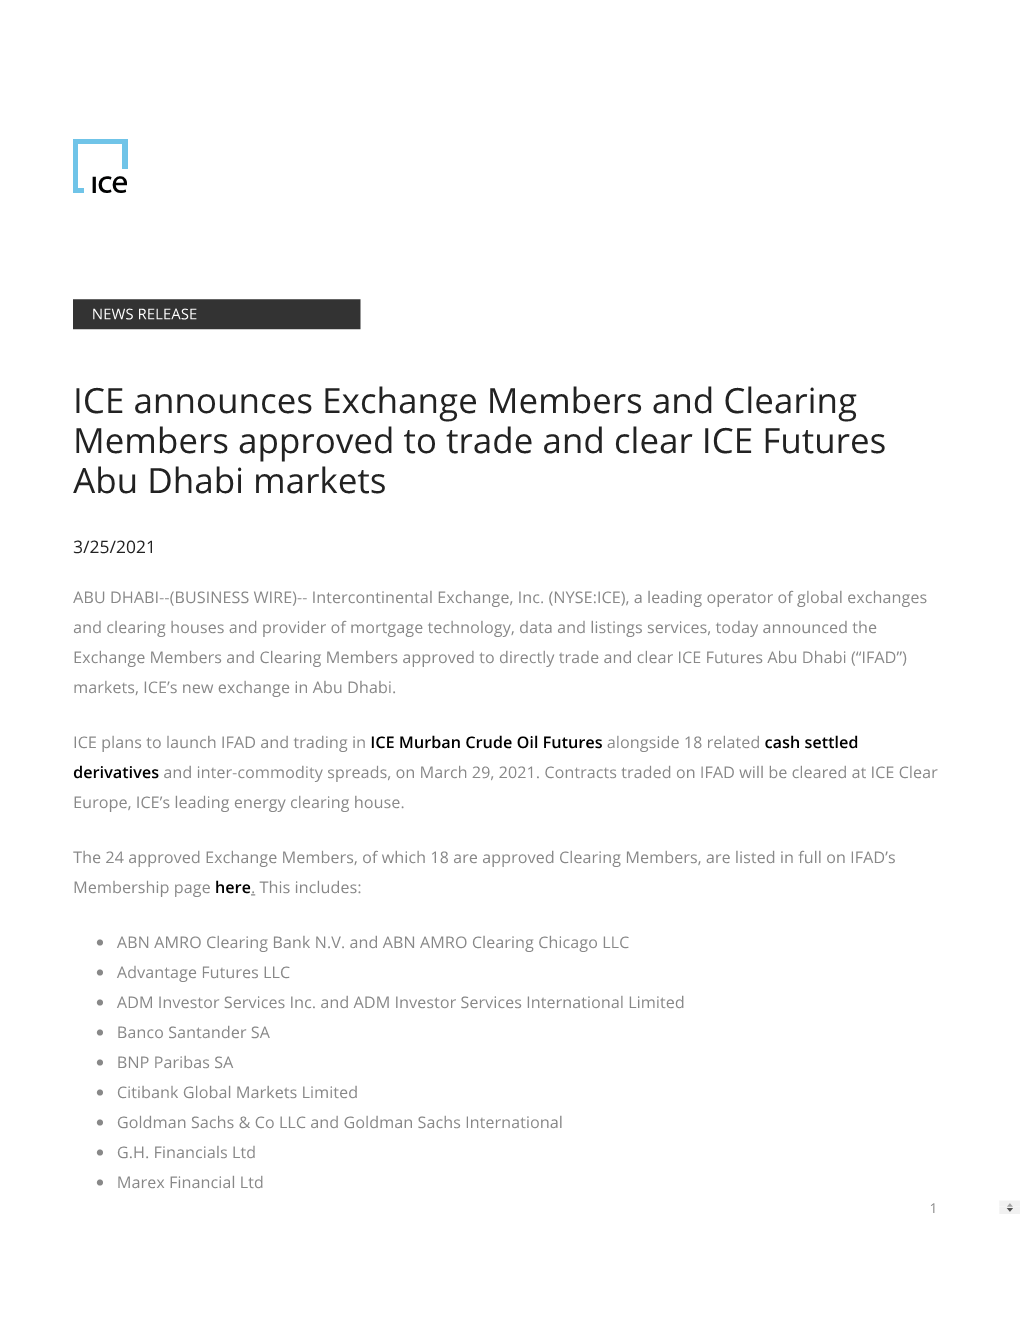 ICE Announces Exchange Members and Clearing Members Approved to Trade and Clear ICE Futures Abu Dhabi Markets